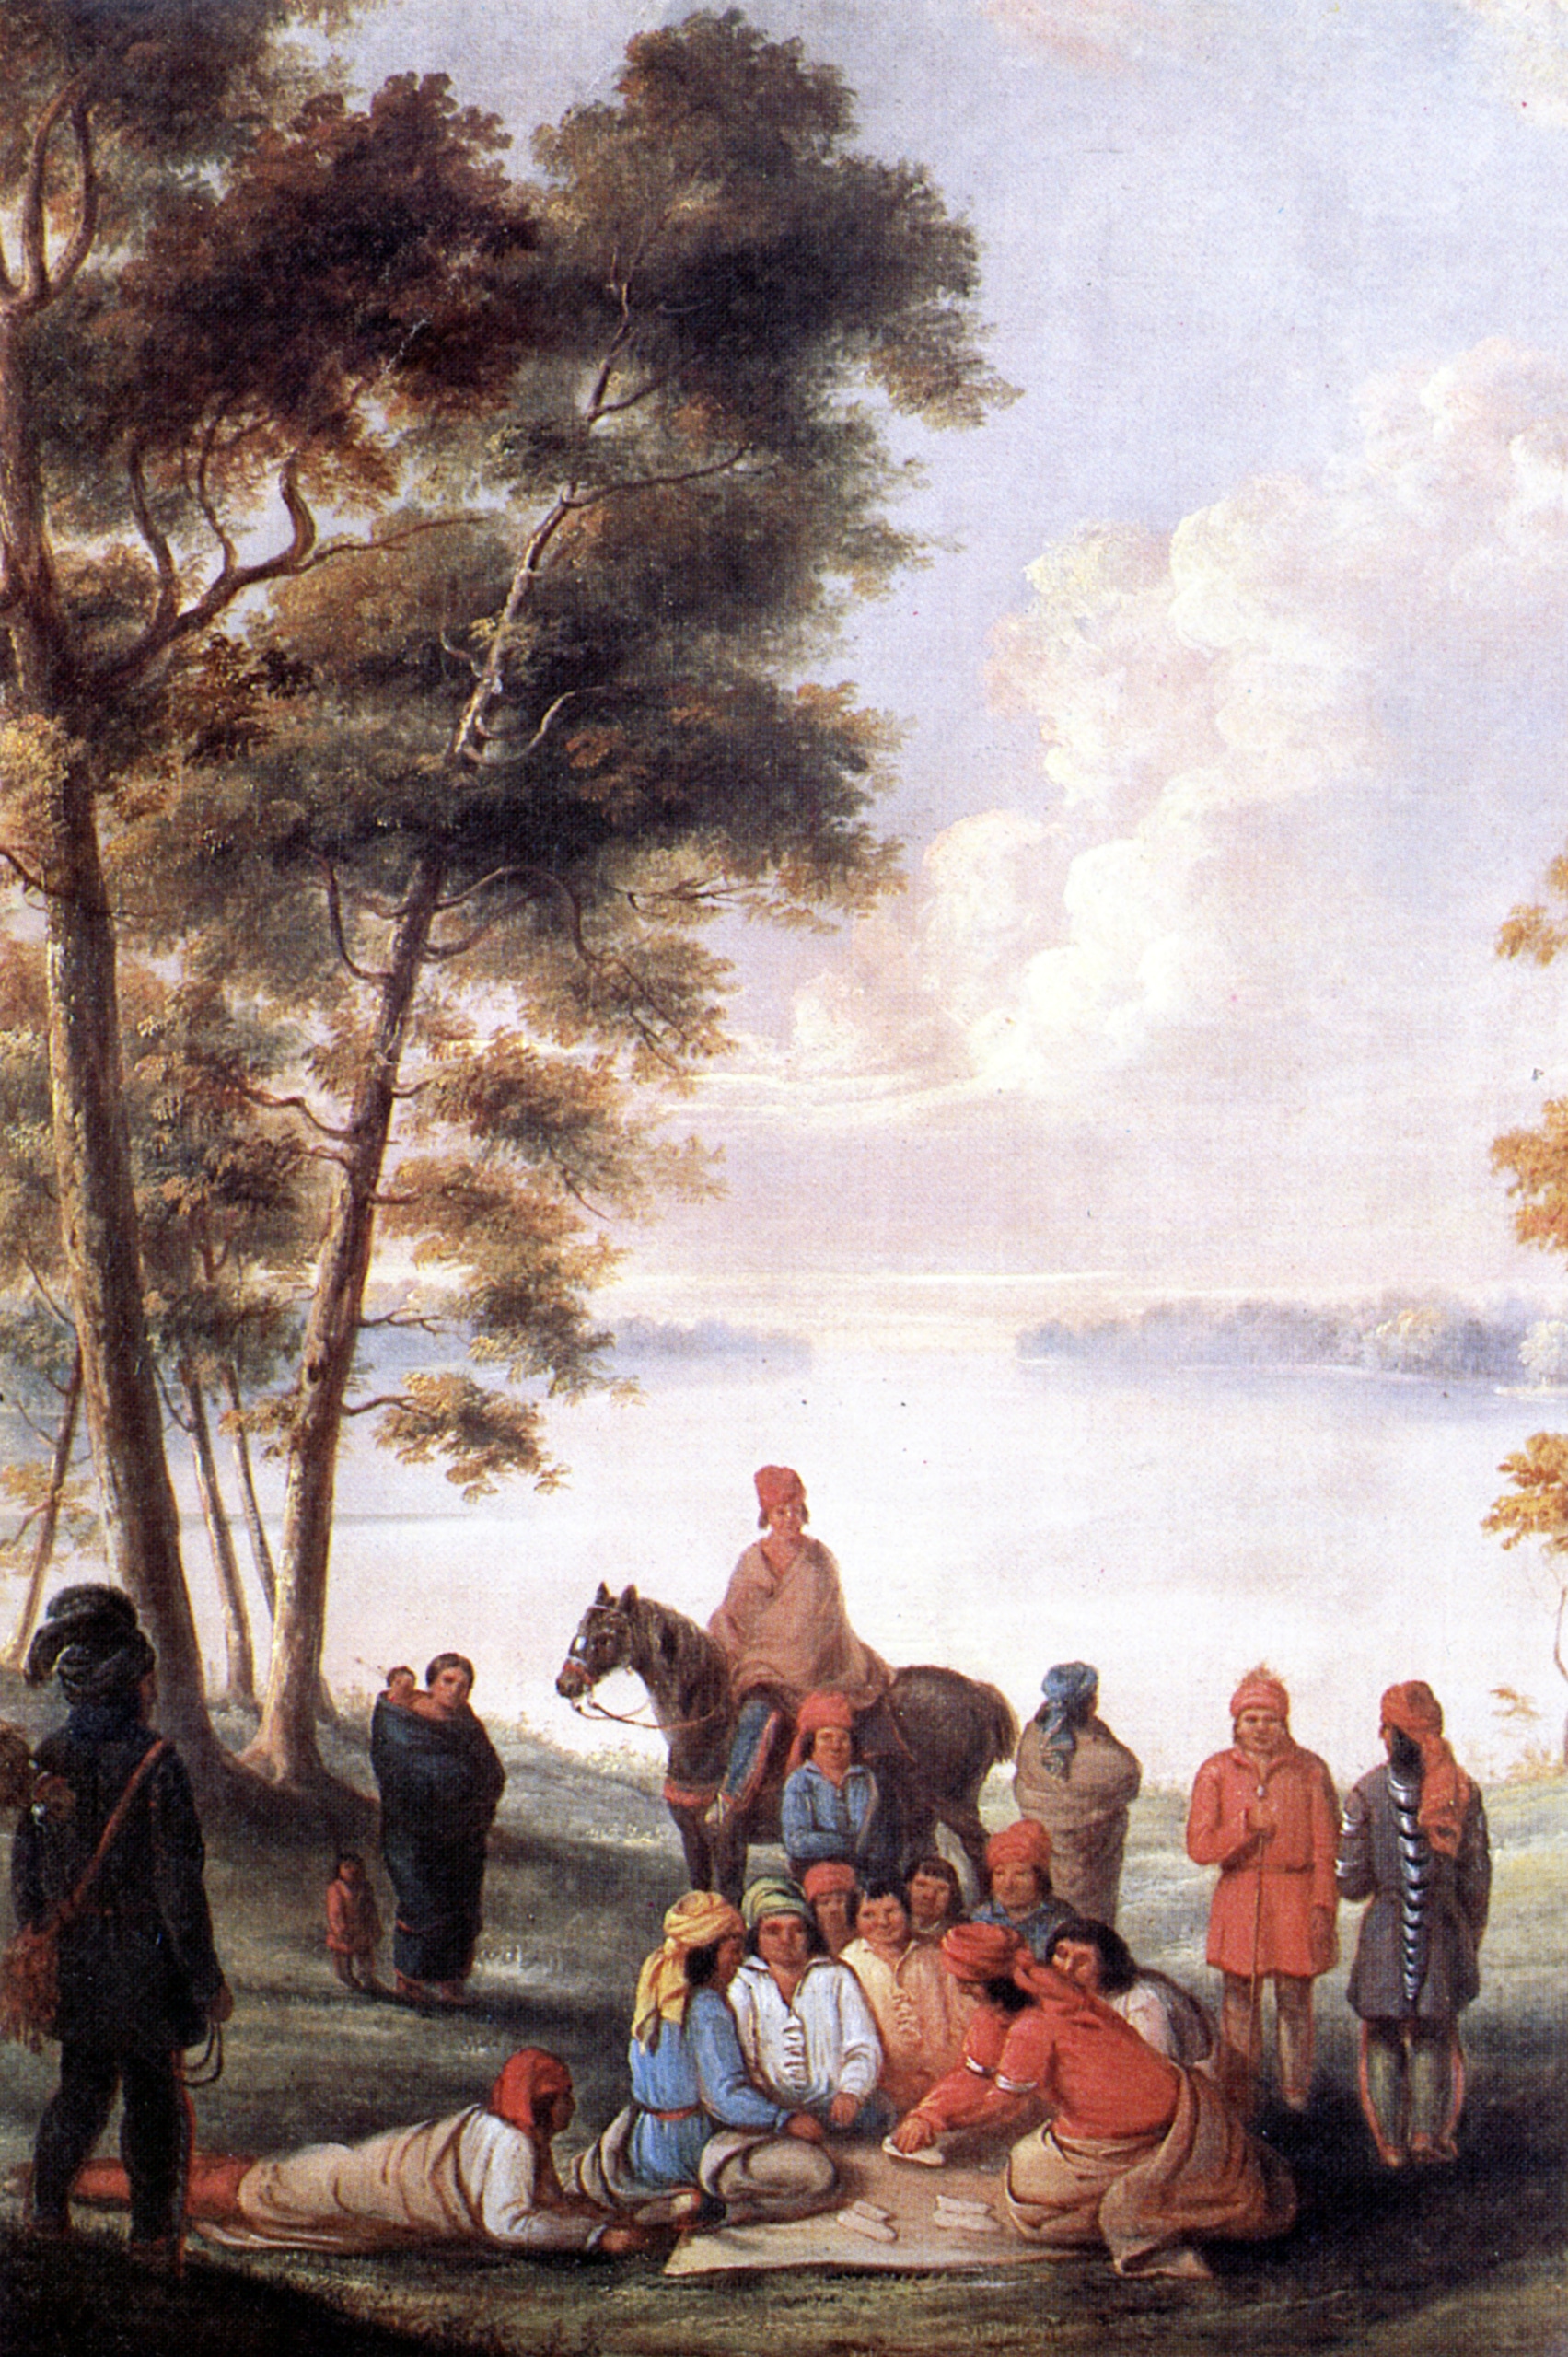 Illustration of several people sitting under a tree playing a moccasin game while others look on.